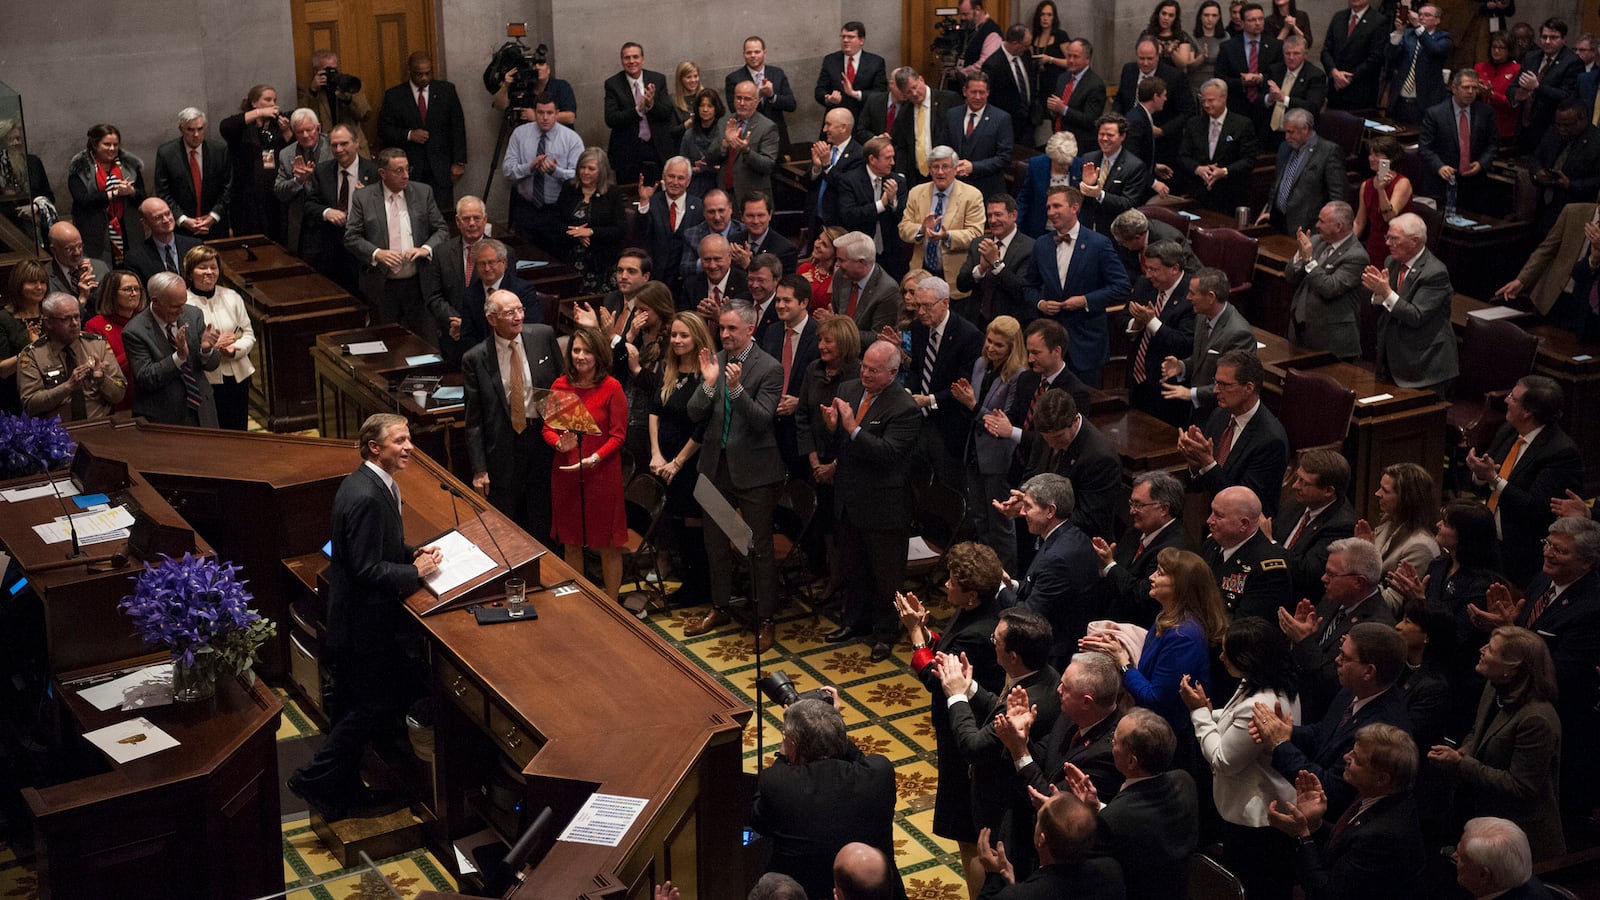 Gov. Bill Haslam receives an ovation during his final State of the State address in January before a joint session of the 110th General Assembly, cabinet members, and guests.